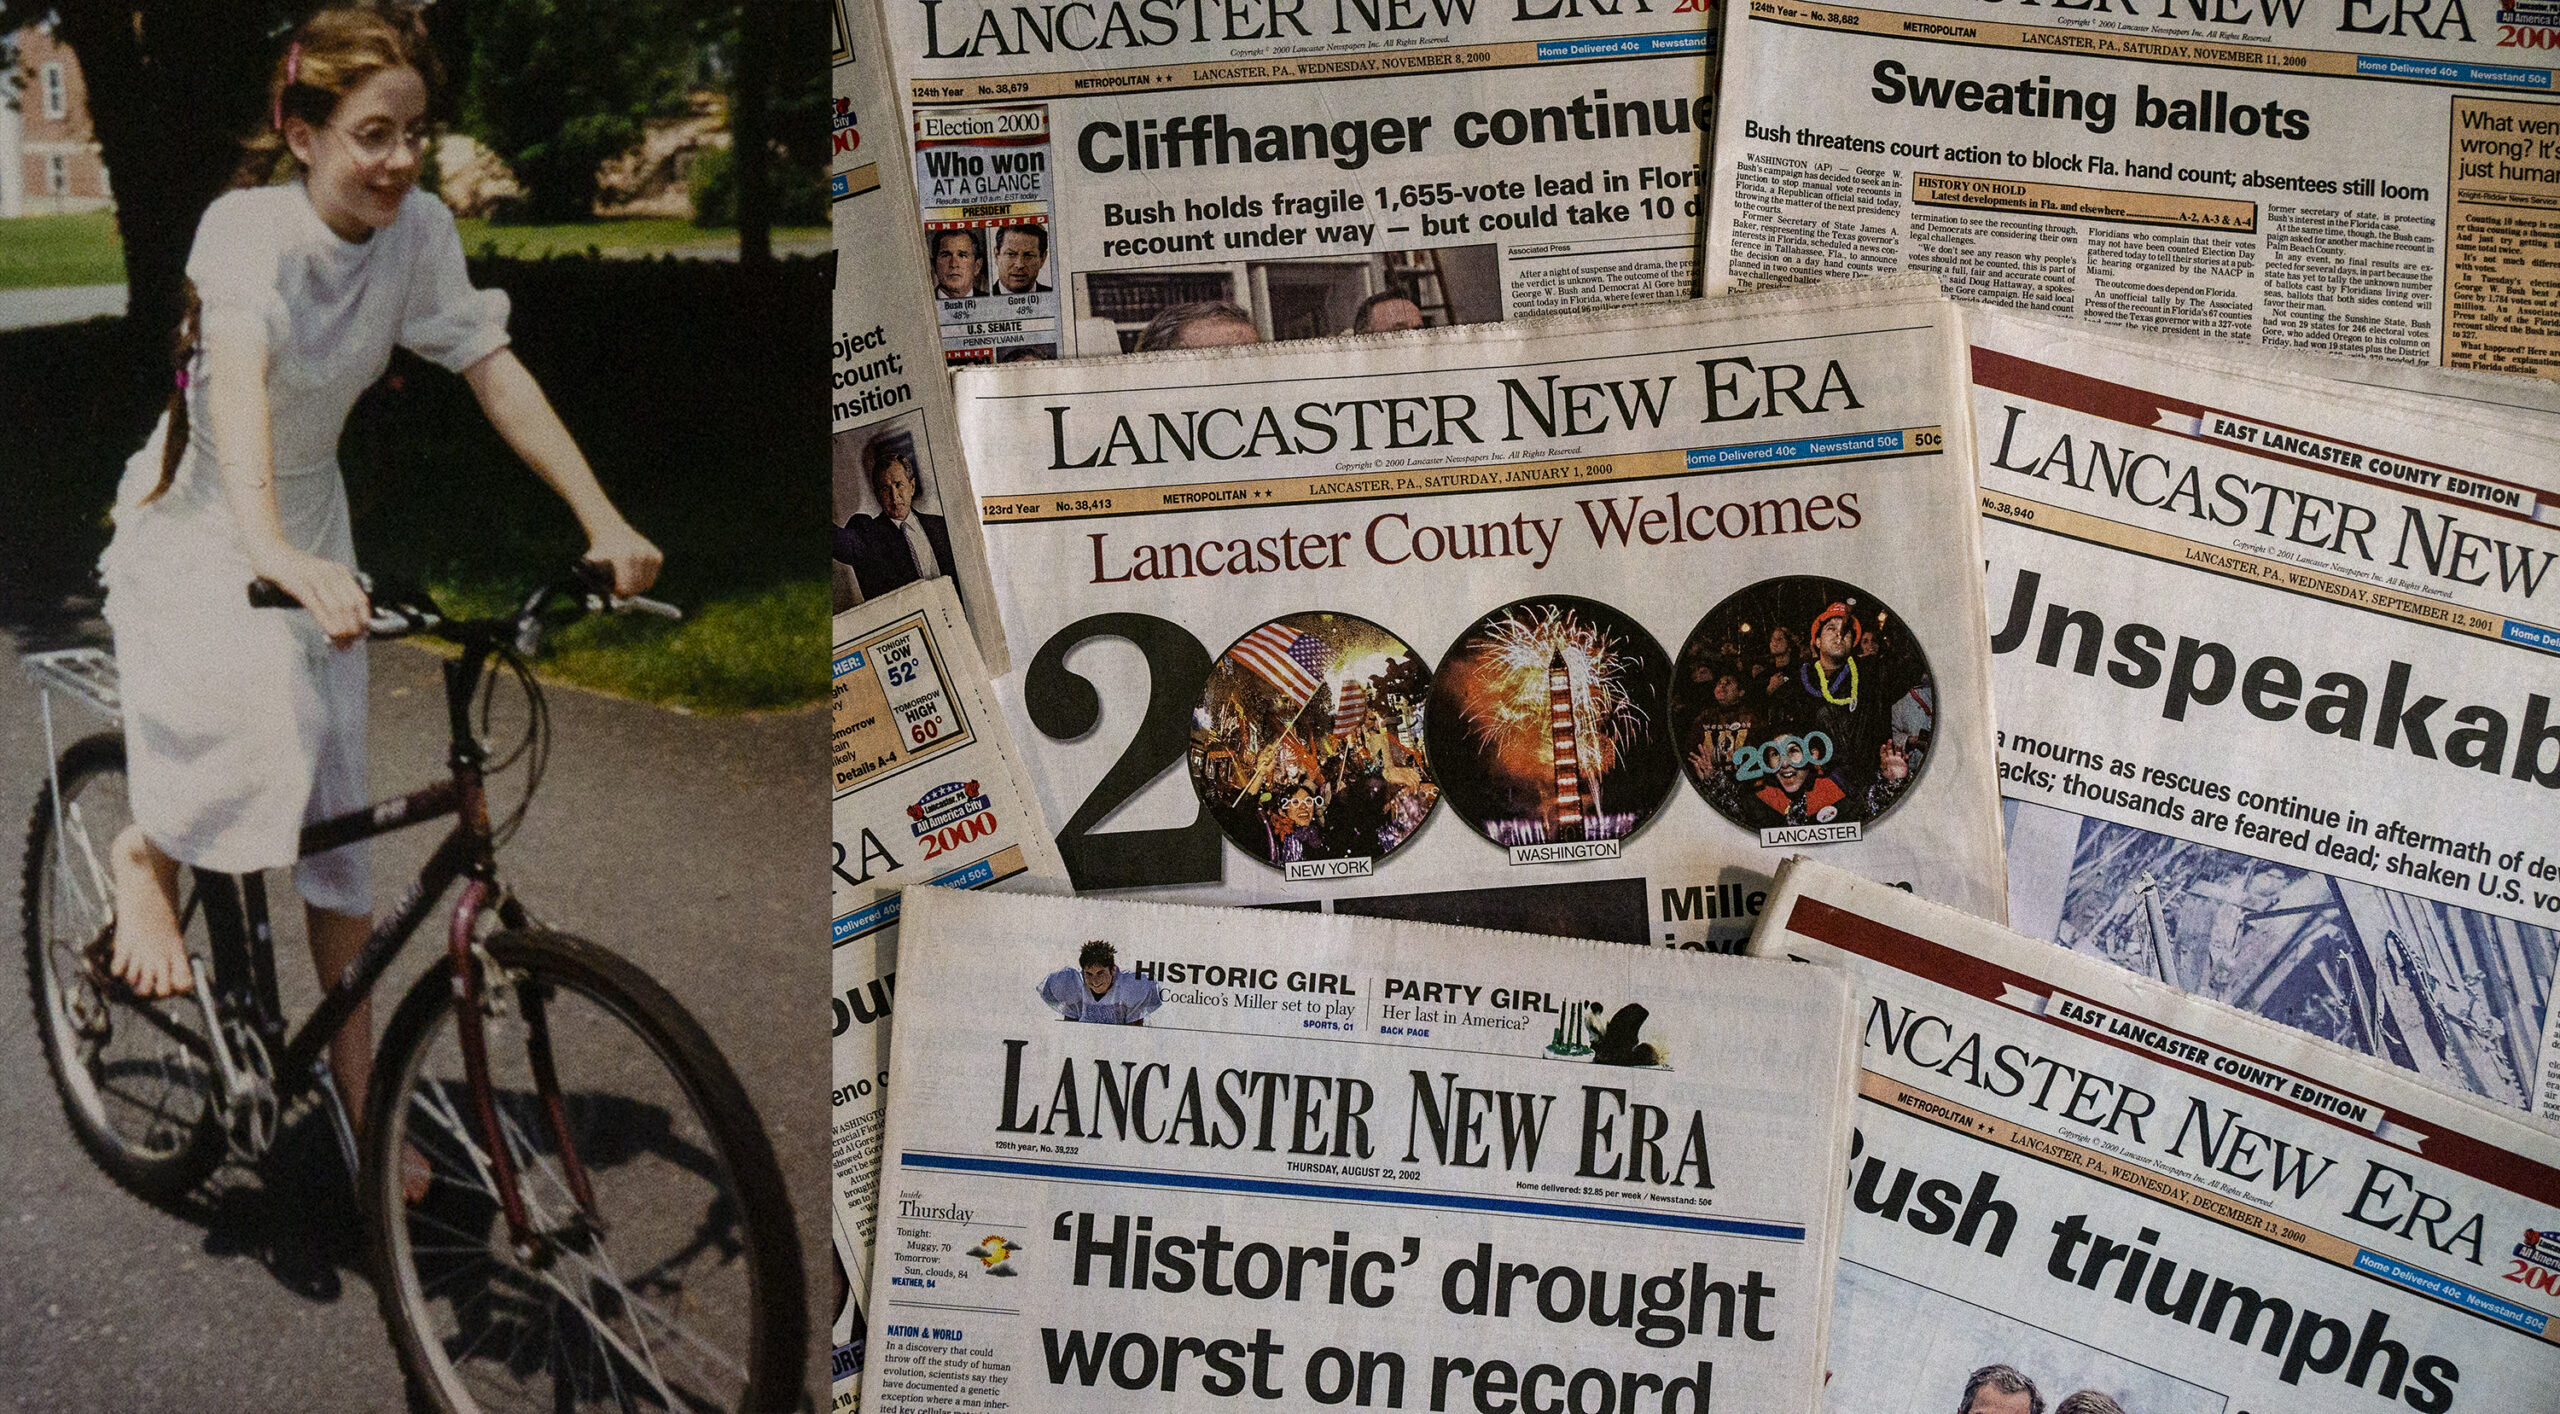 Newspapers from the early 2000s and a girl on a bike